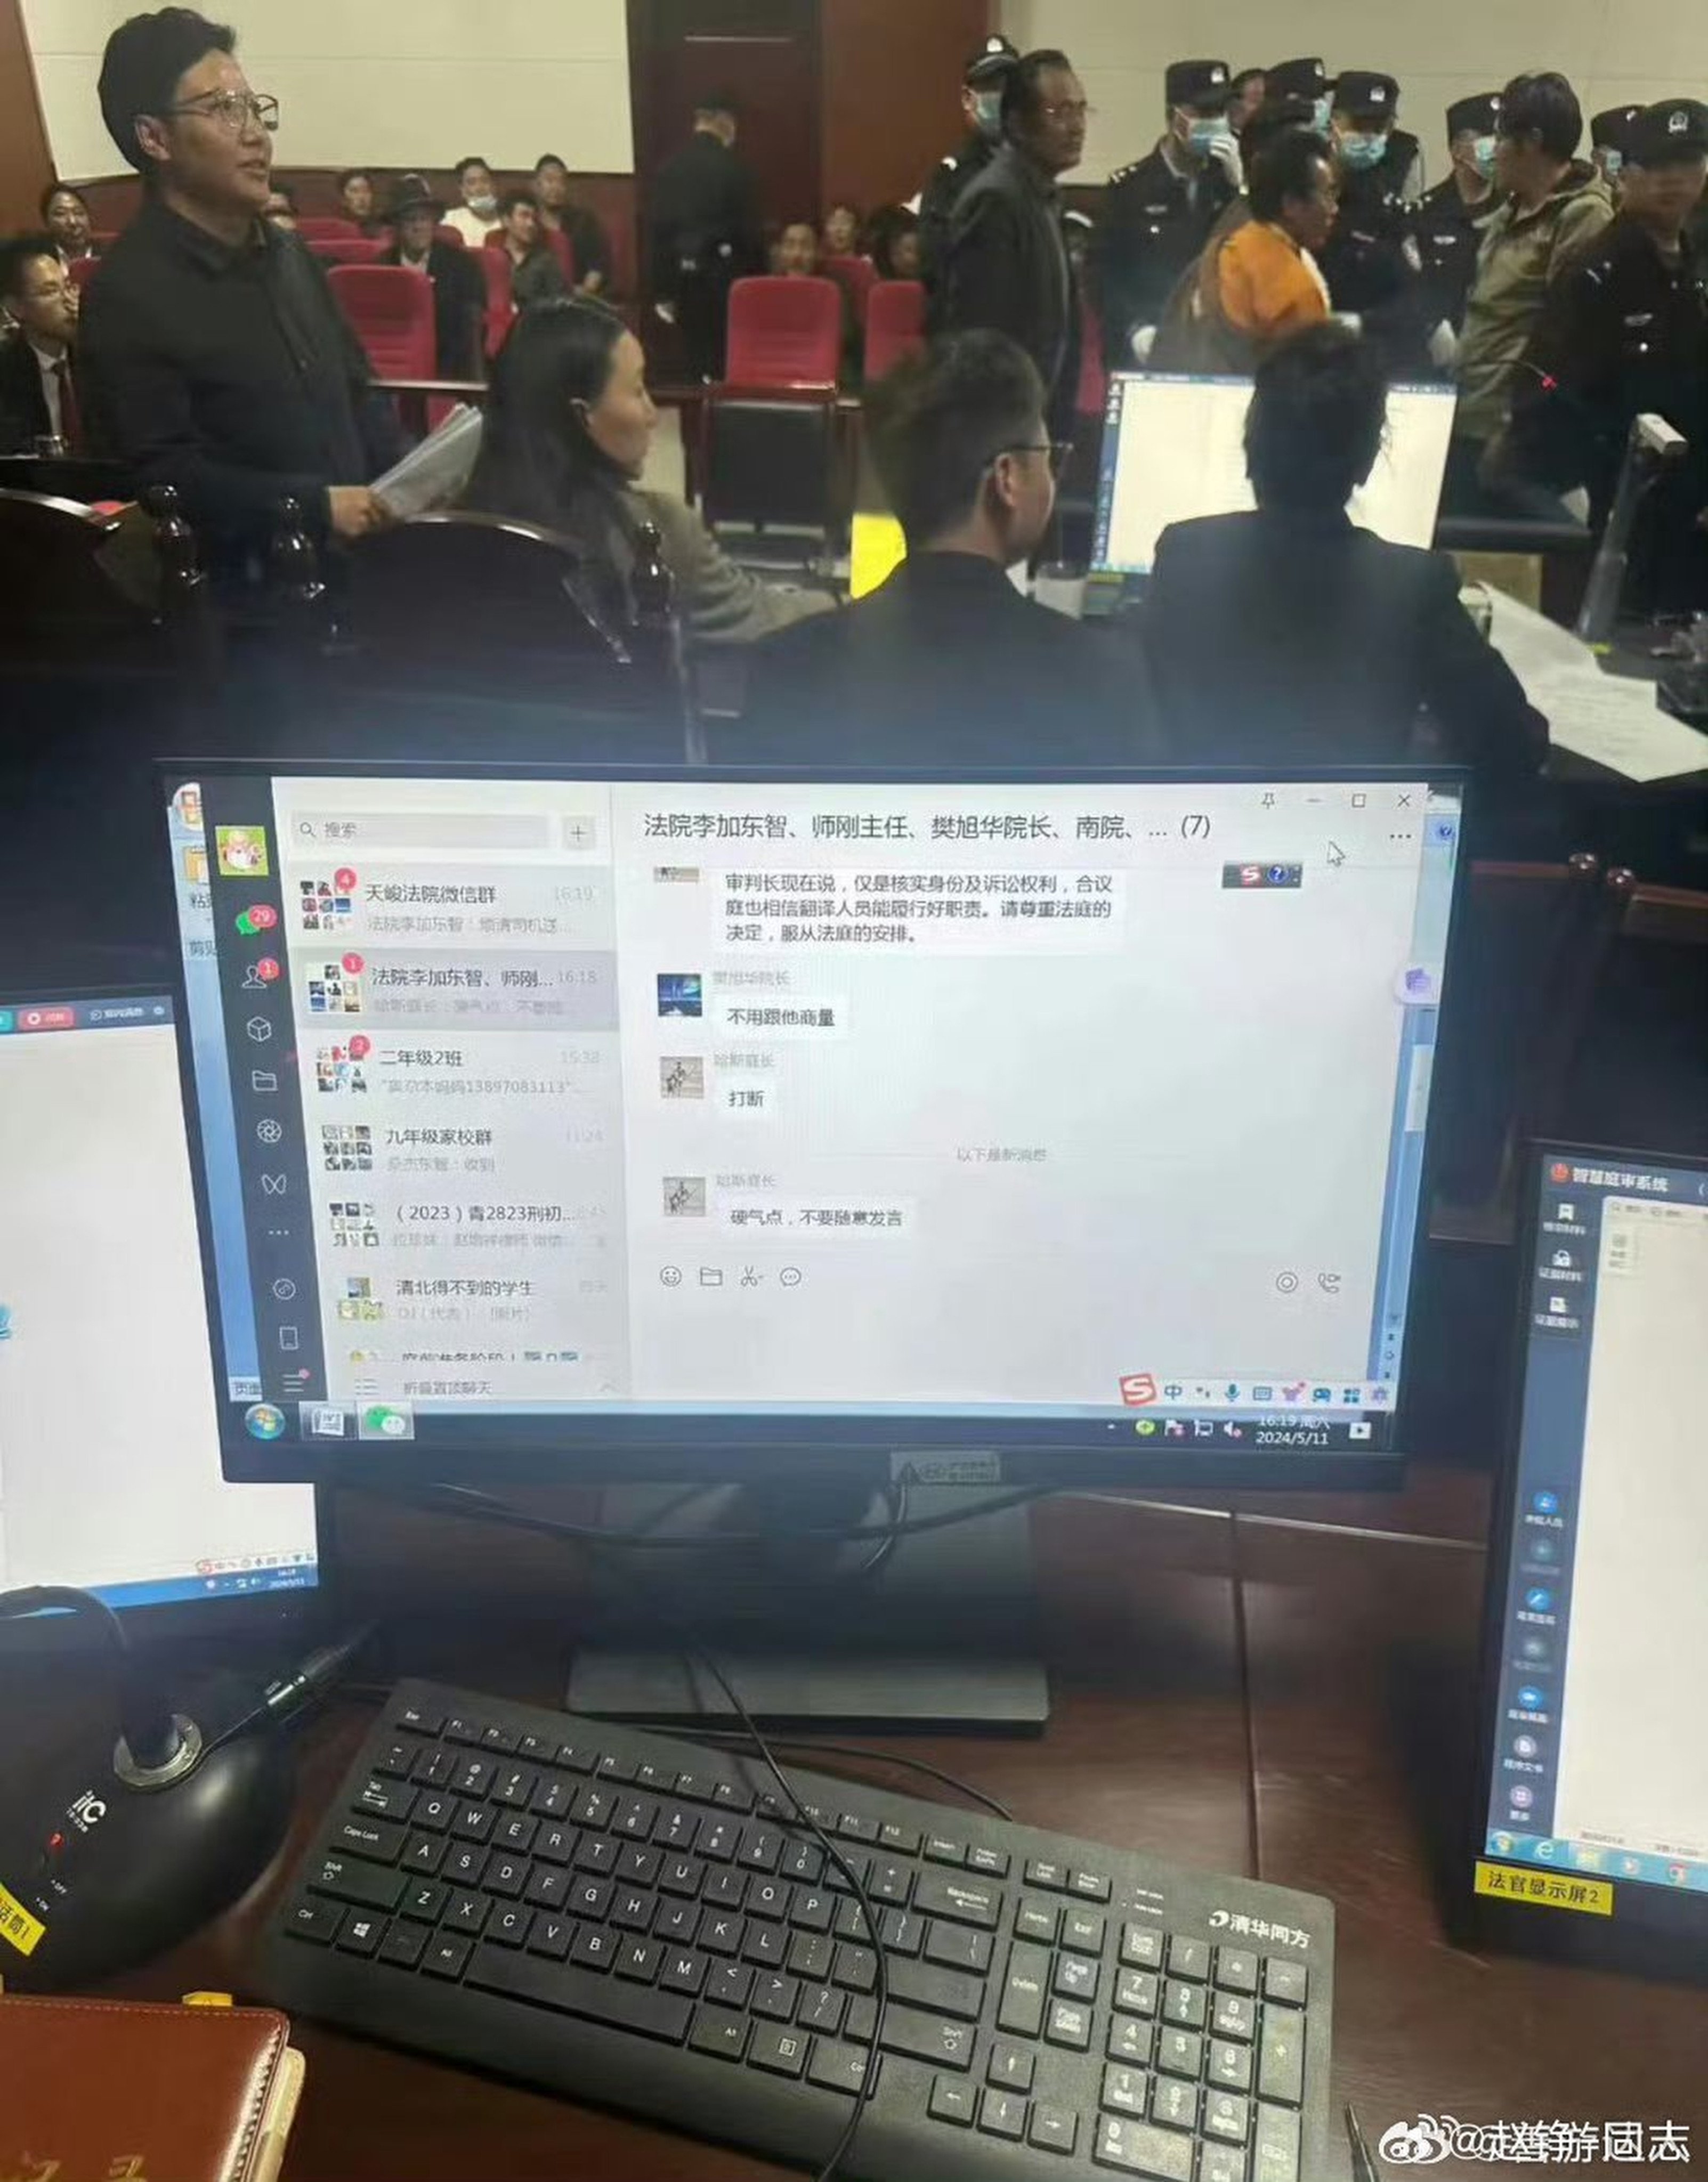 A photo taken by a lawyer during a trial in Qinghai province appears to show a judge receiving real-time instructions from his supervisors. Photo: Weibo